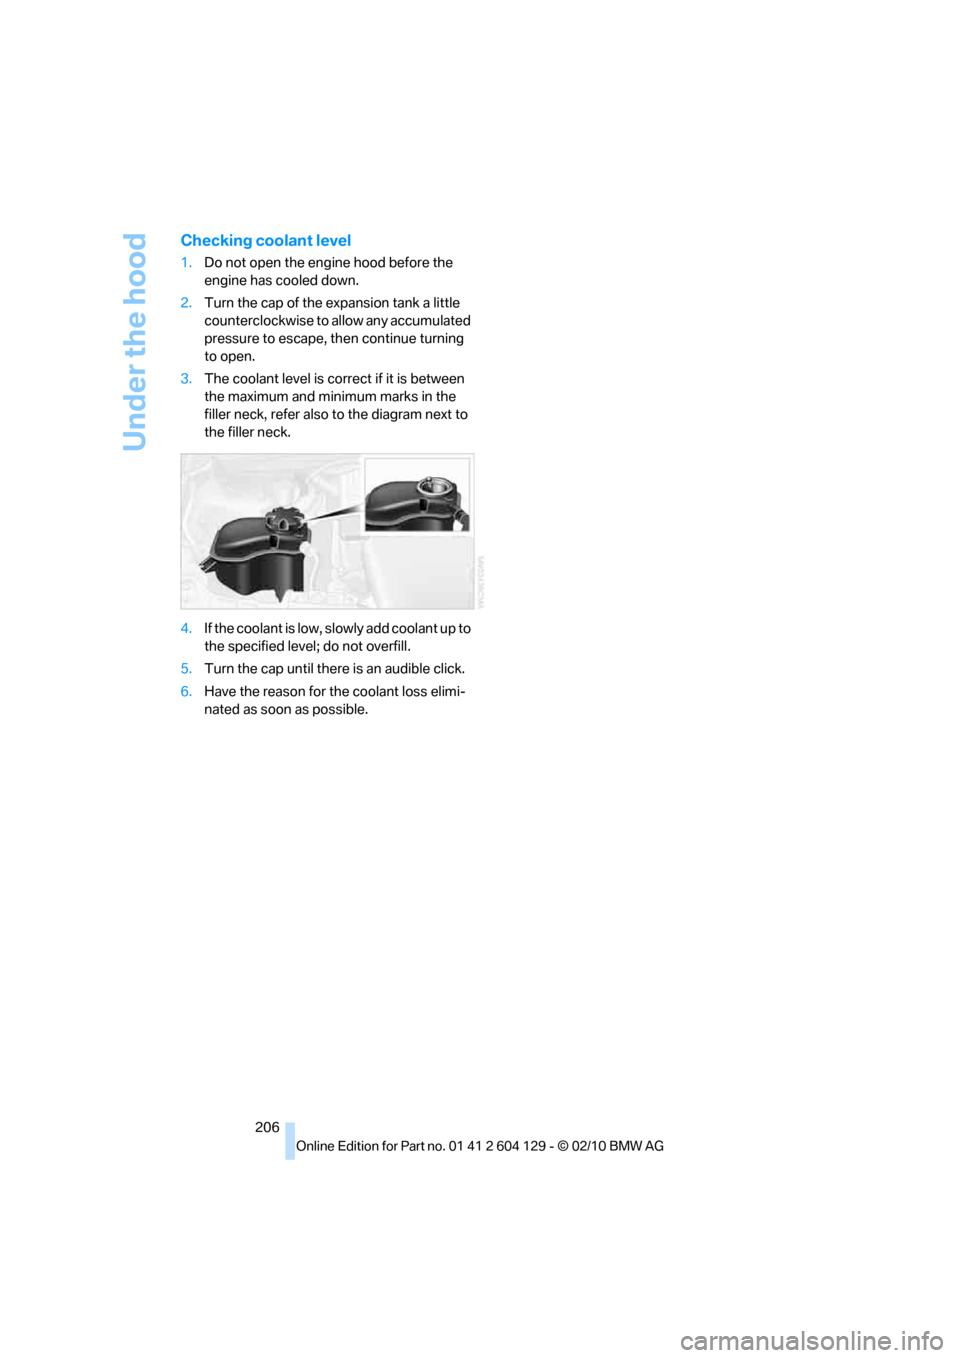 BMW 128I COUPE 2011 E82 Service Manual Under the hood
206
Checking coolant level
1.Do not open the engine hood before the 
engine has cooled down.
2.Turn the cap of the expansion tank a little 
counterclockwise to allow any accumulated 
pr